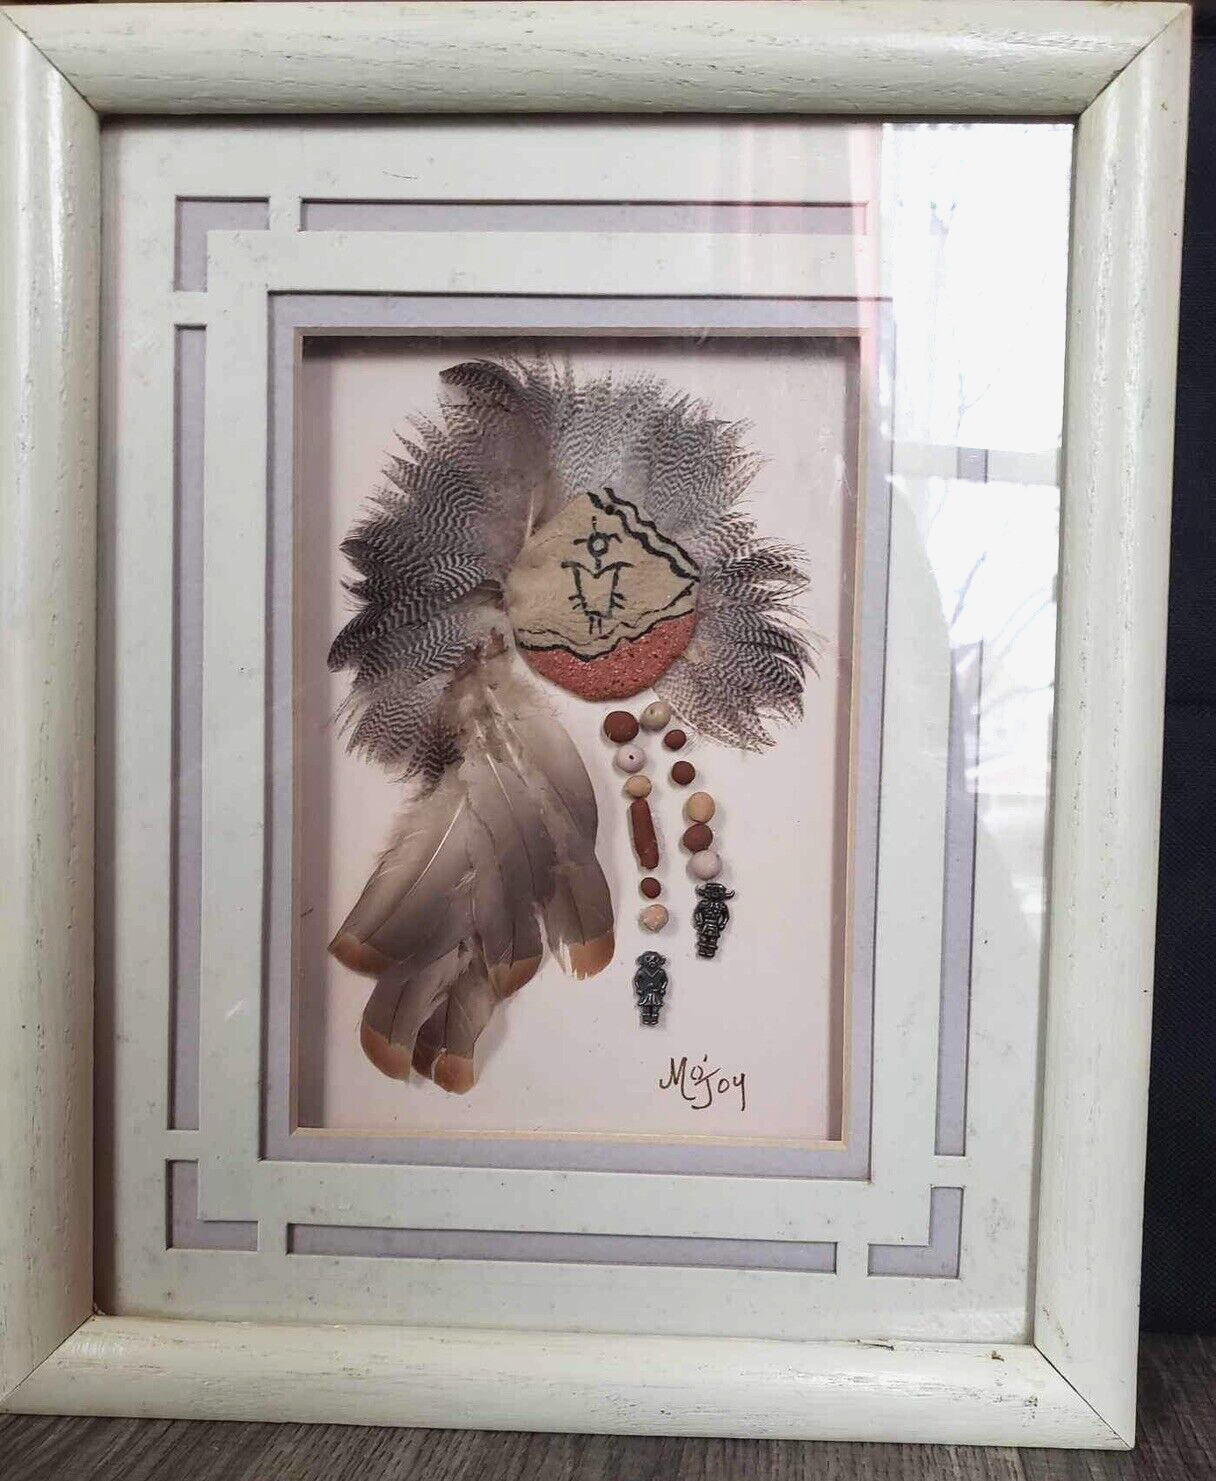 VTG Native American Art Framed Stone Painting w Feathers & Beads 1970s Signed